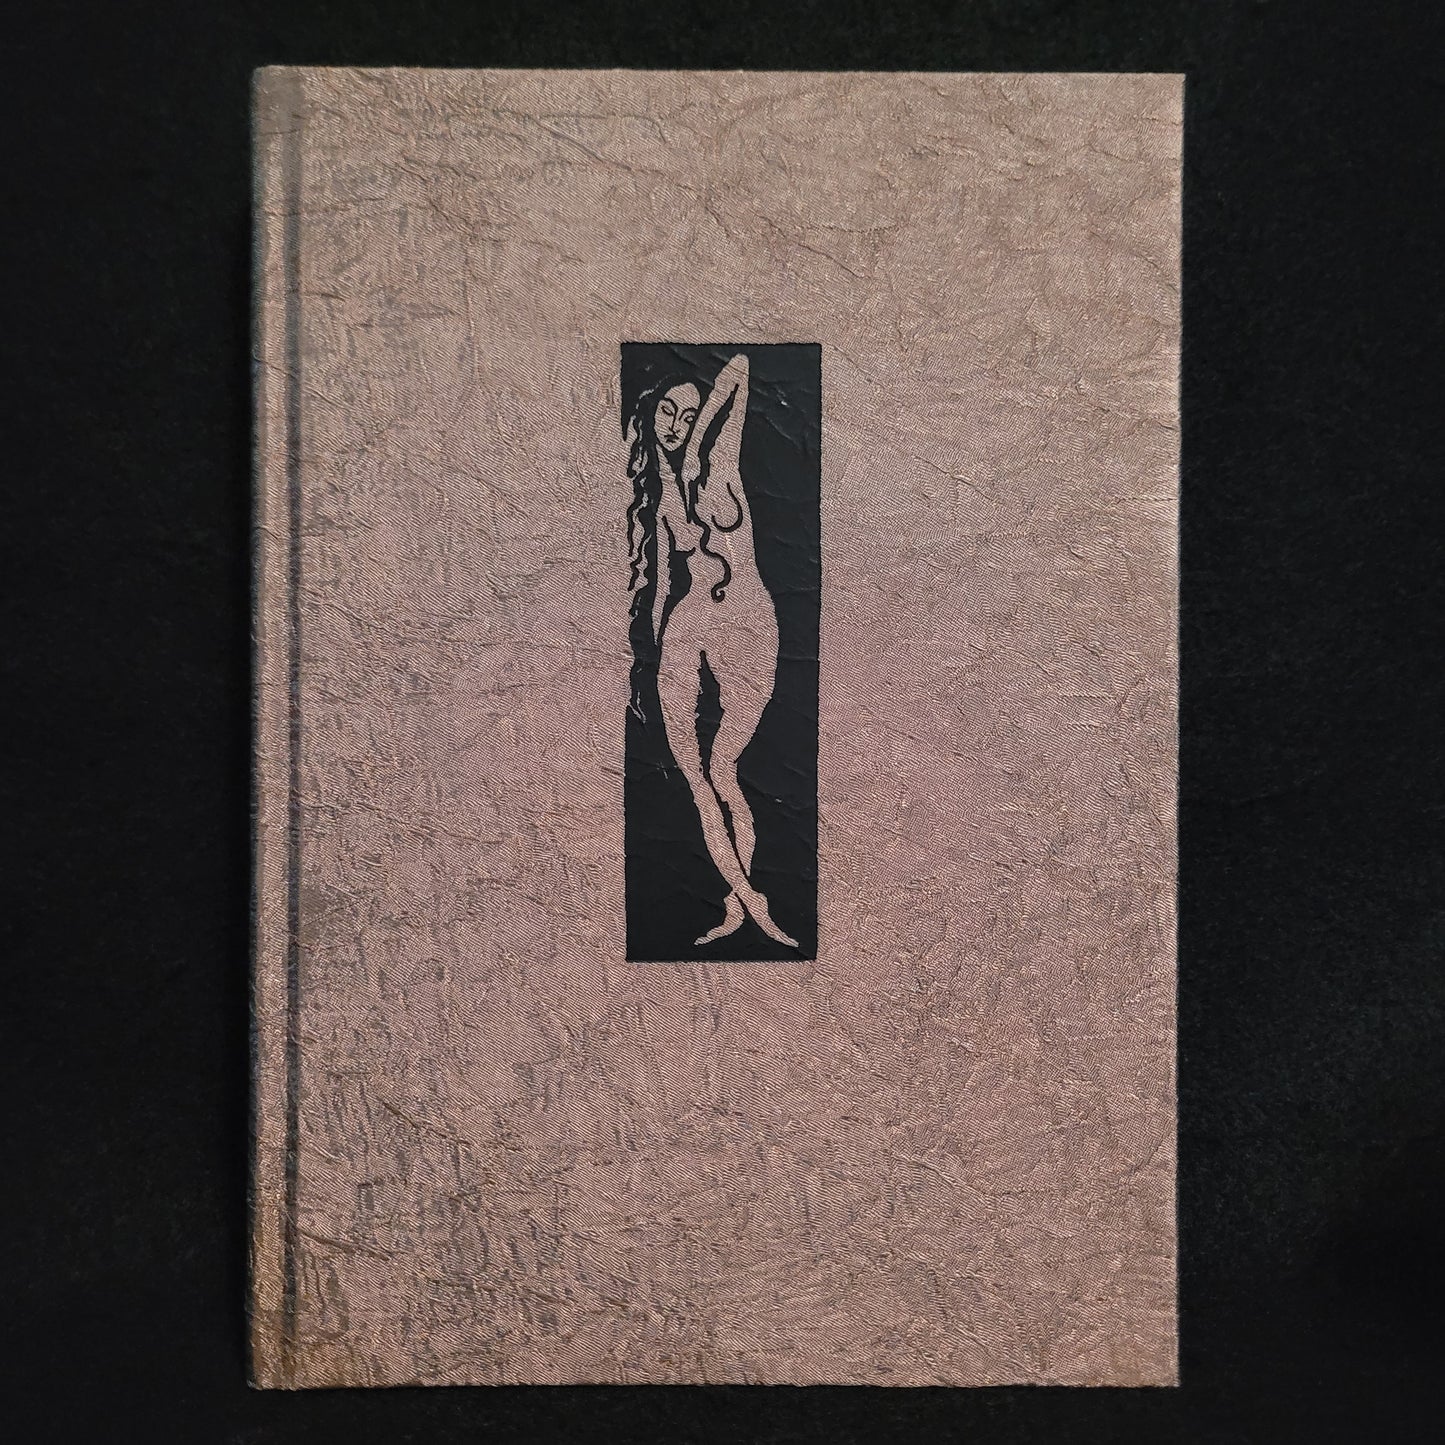 Mandragora: Further Explorations in Esoteric Poesis Edited by Ruby Sara (Scarlet Imprint, 2012) Limited Edition Hardback